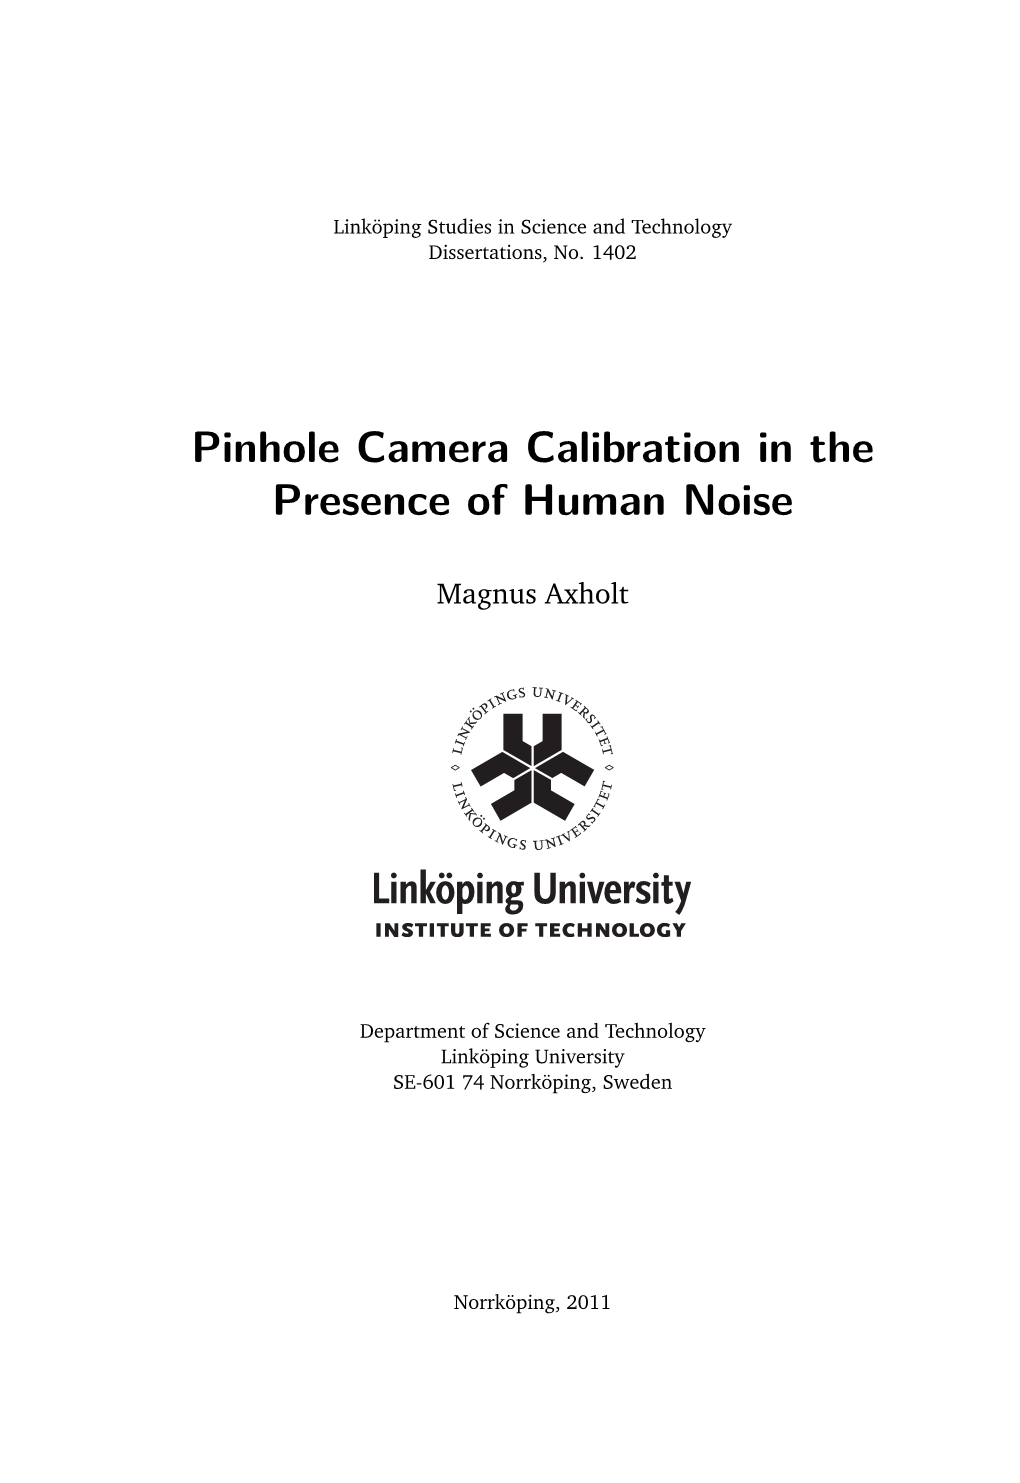 Pinhole Camera Calibration in the Presence of Human Noise